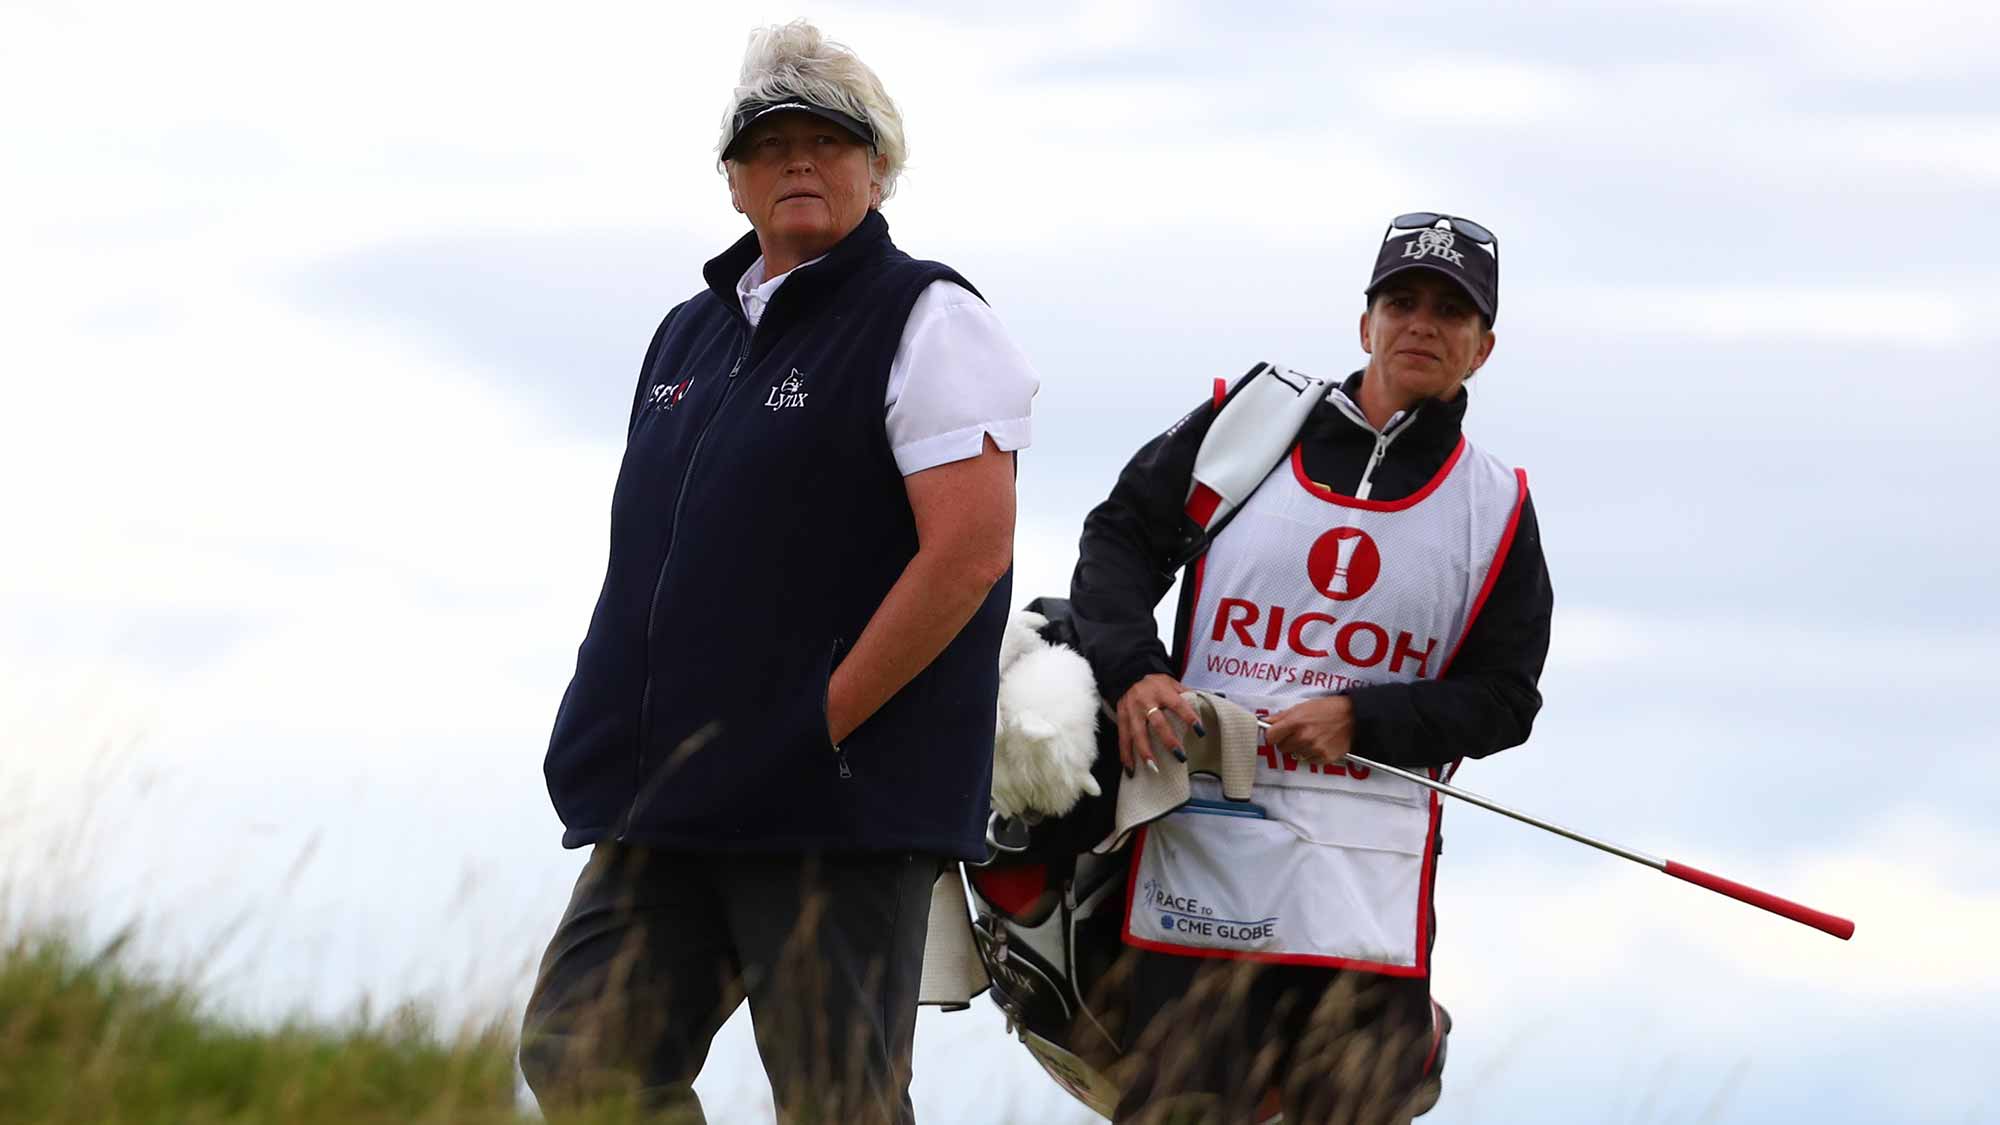 Dame Laura Davies looks down the 4th hole during the second round of the Ricoh Women's British Open at Kingsbarns Golf Links